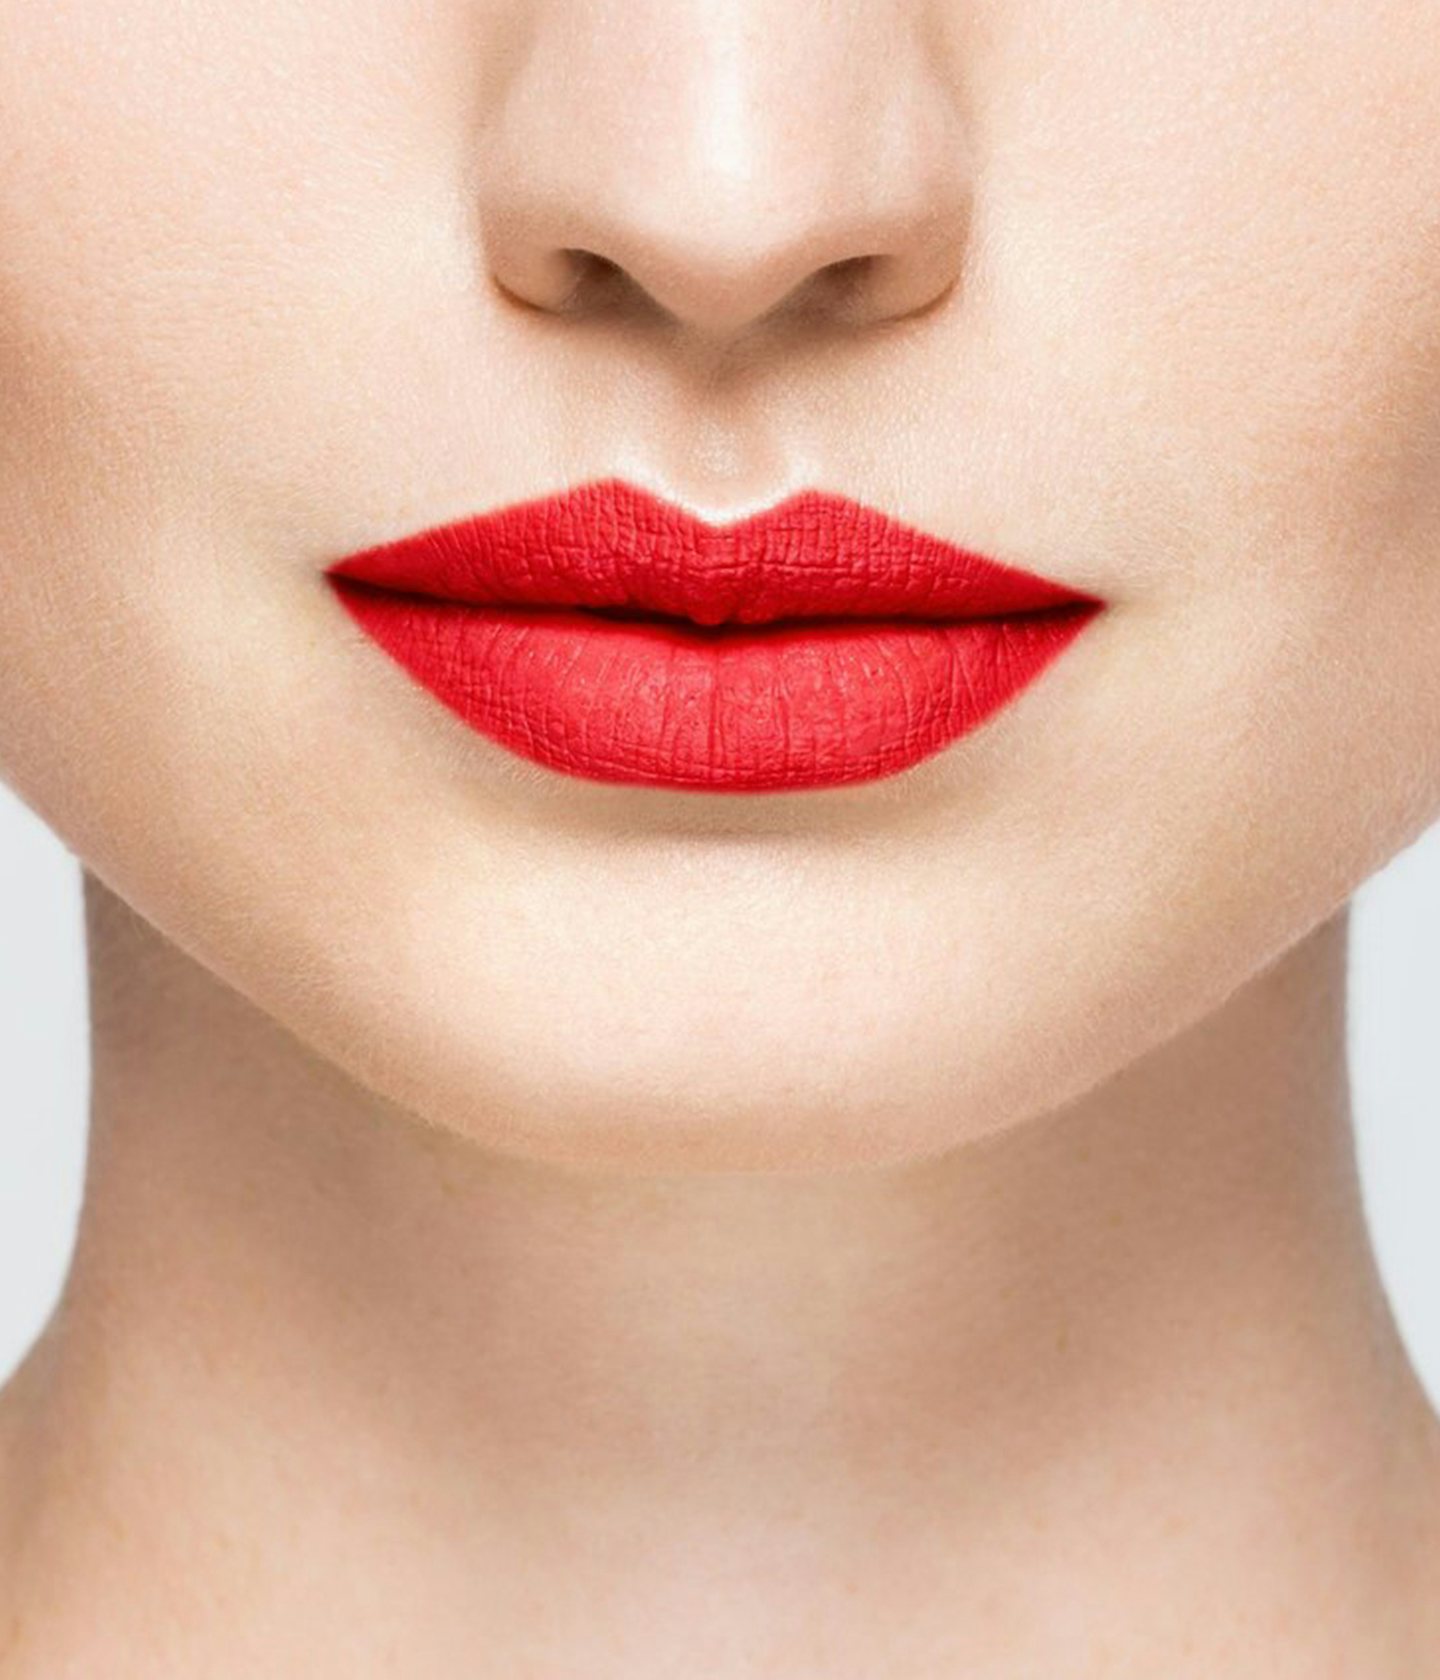 La bouche rouge Regal Red lipstick shade on the lips of a fair skin model